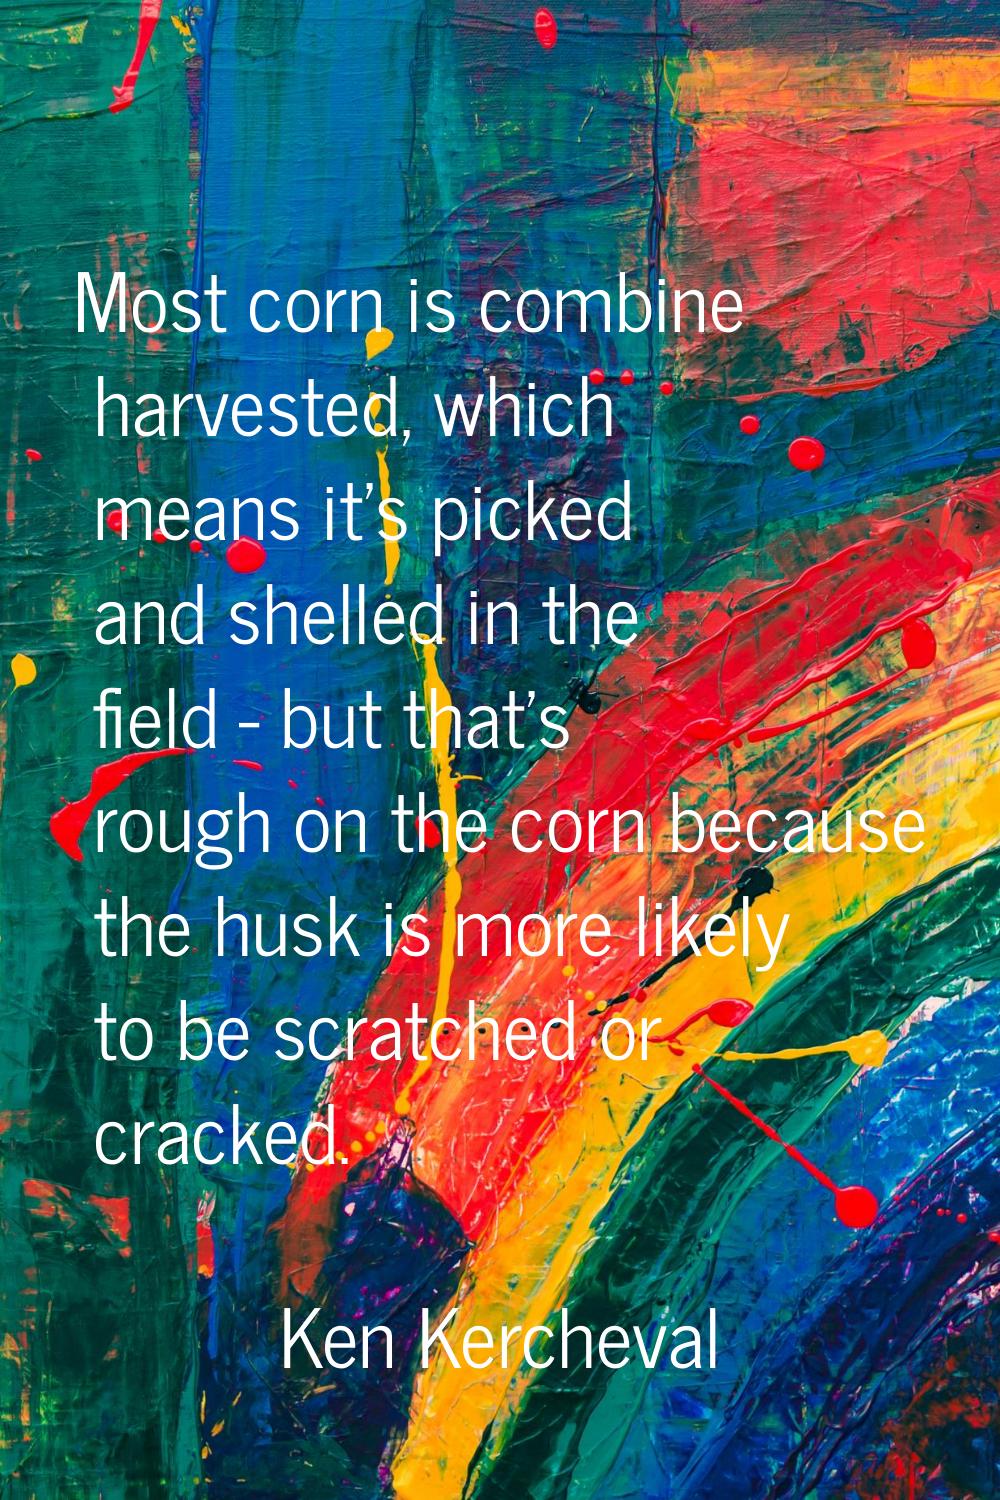 Most corn is combine harvested, which means it's picked and shelled in the field - but that's rough